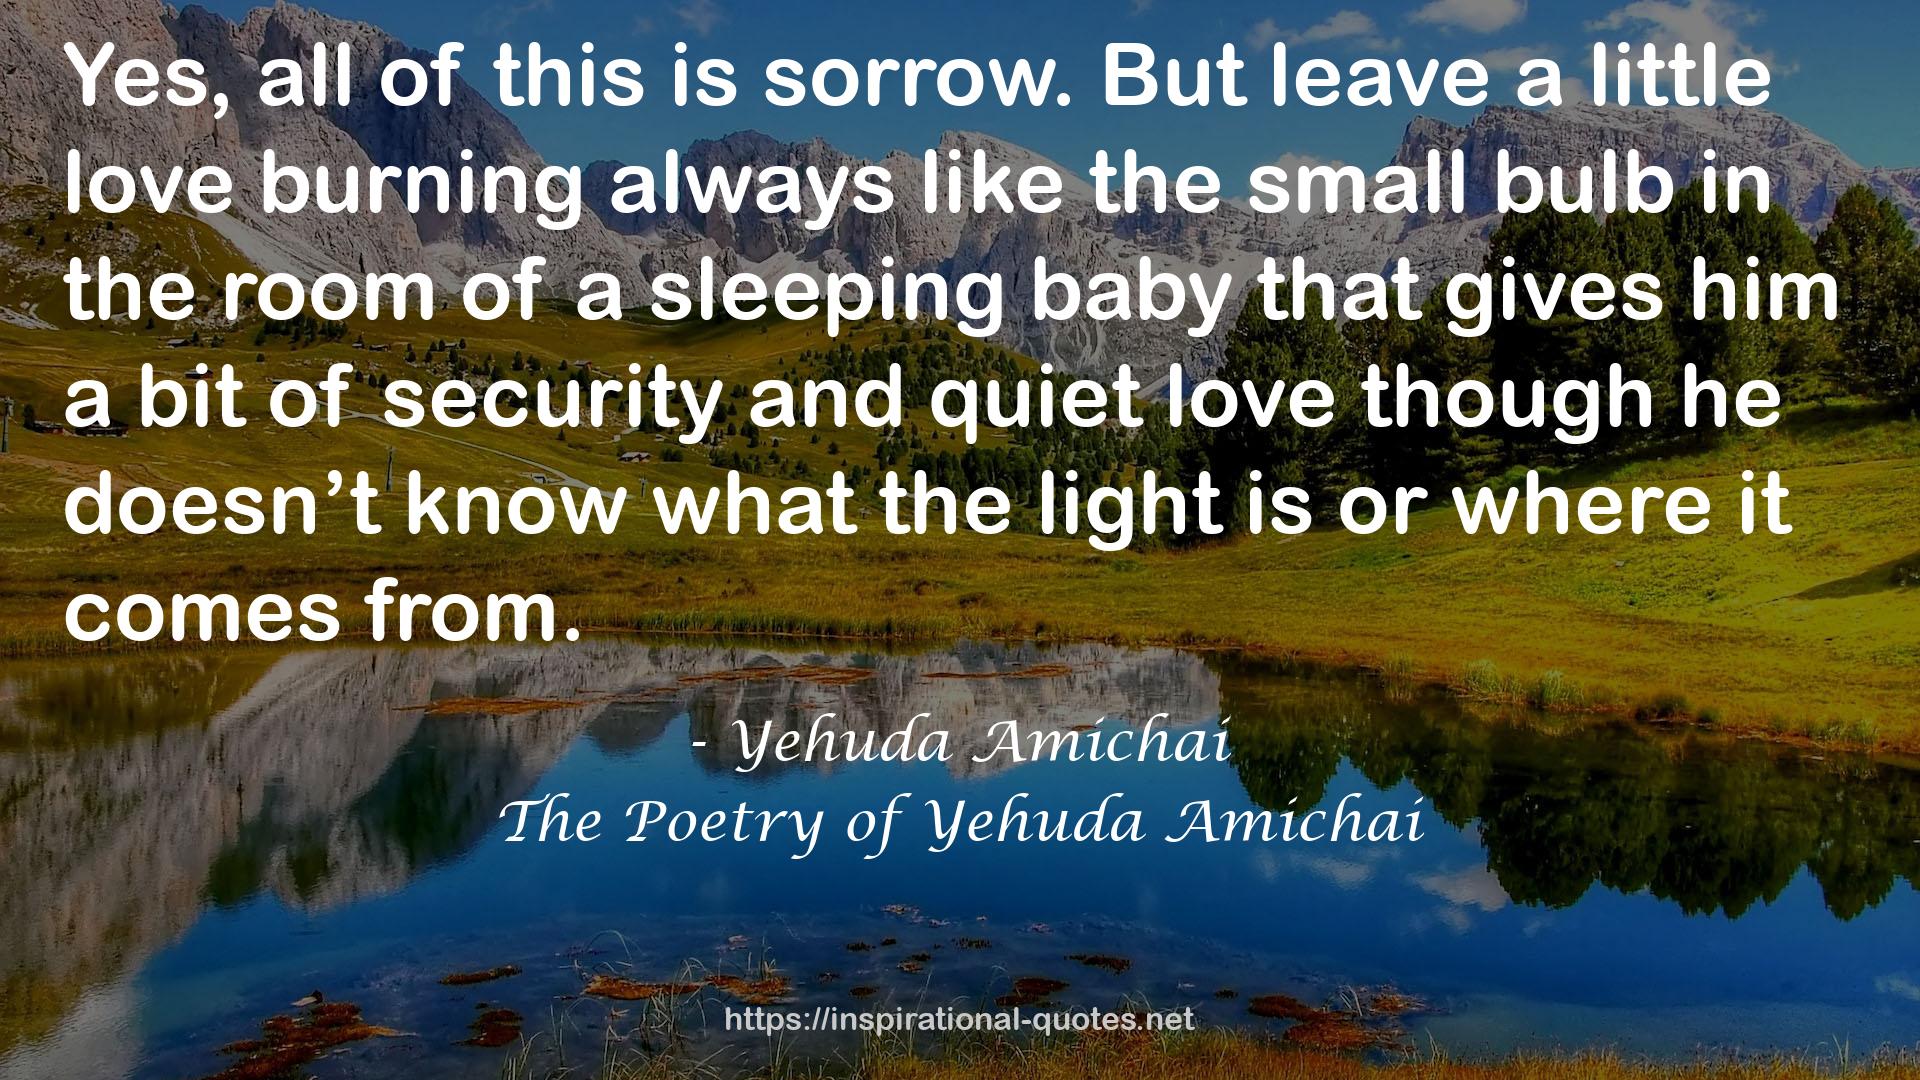 The Poetry of Yehuda Amichai QUOTES